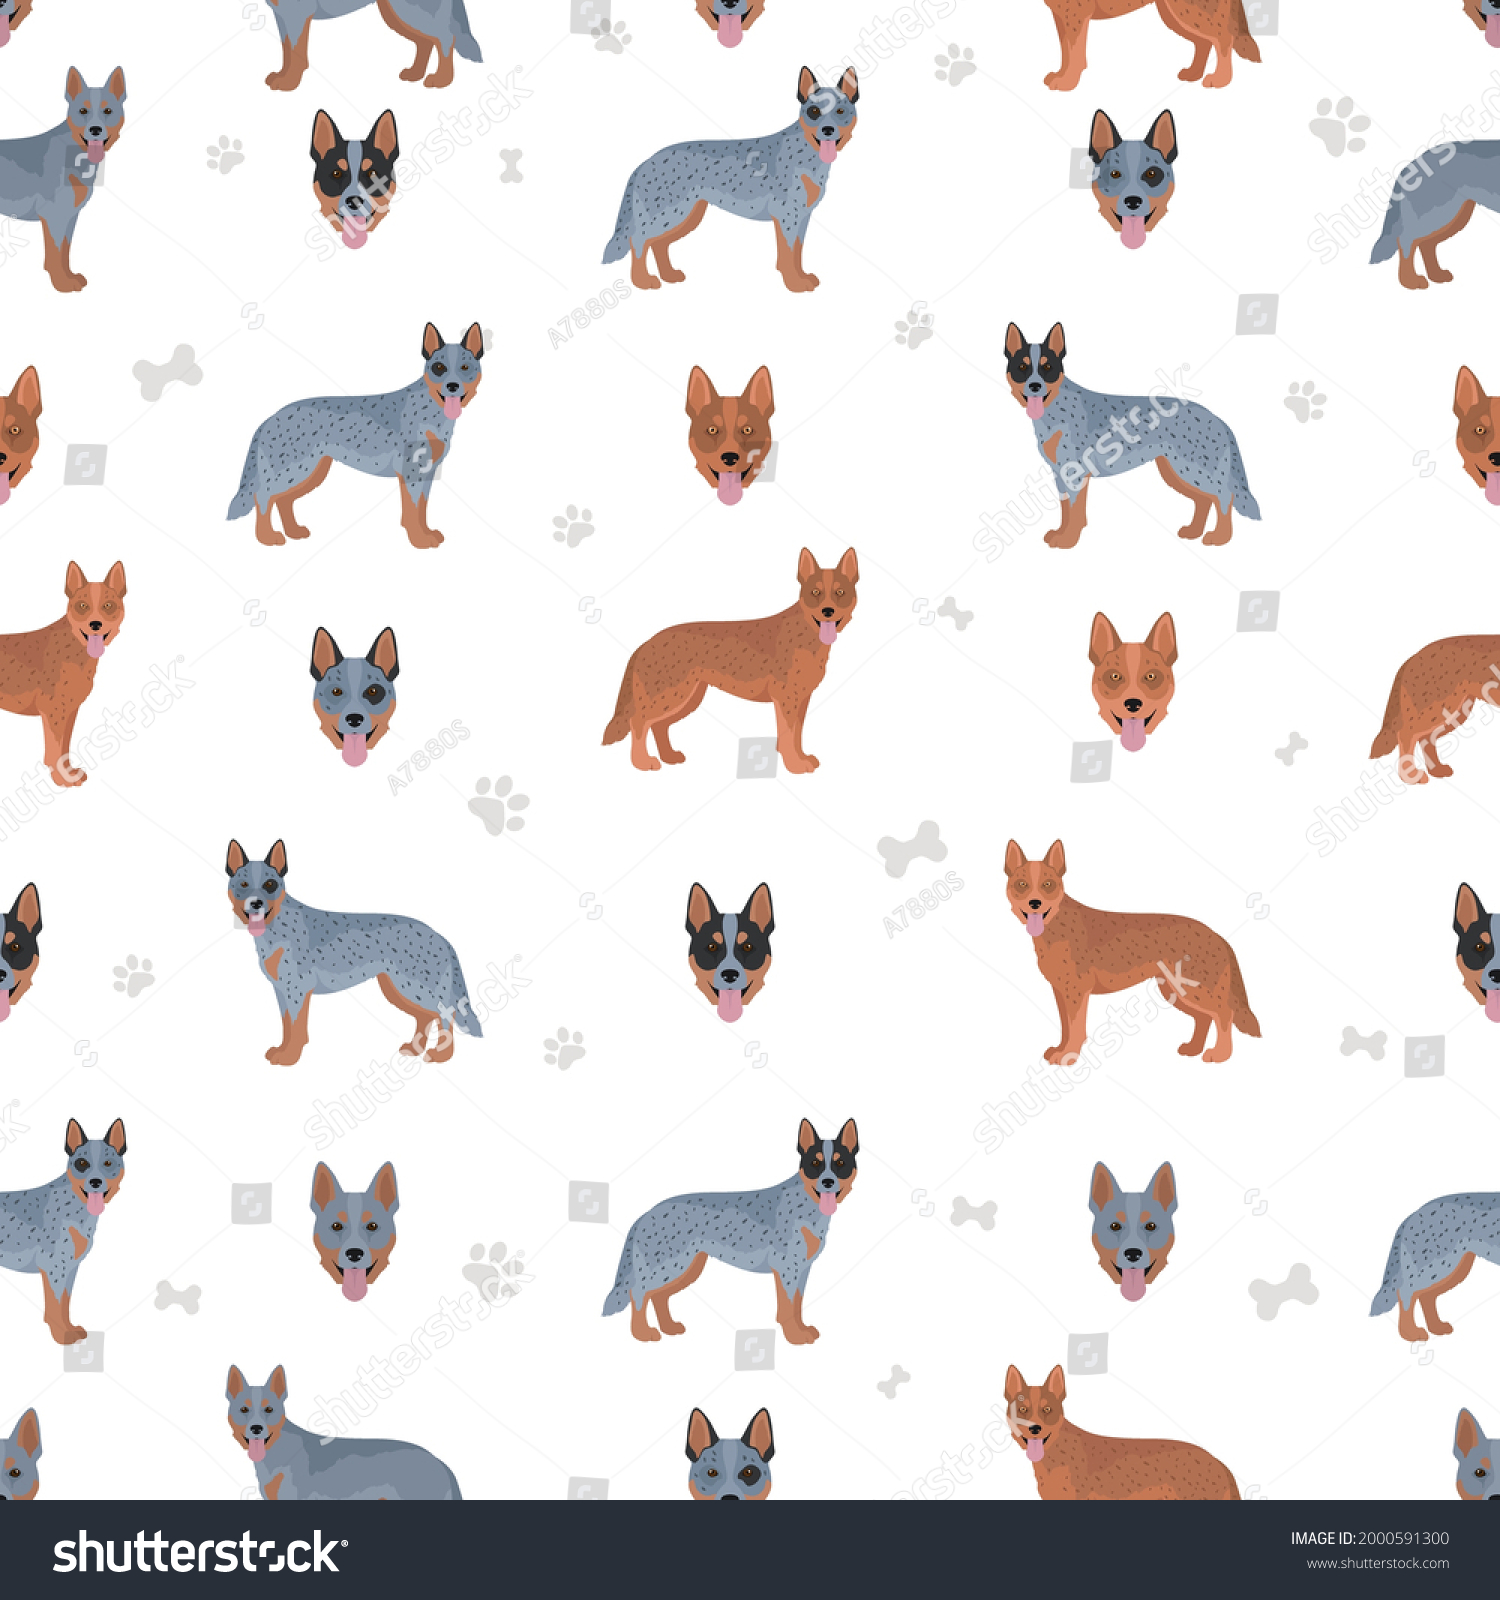 SVG of Australian cattle dog all colours seamless pattern.  Different coat colors and poses set.  Vector illustration svg